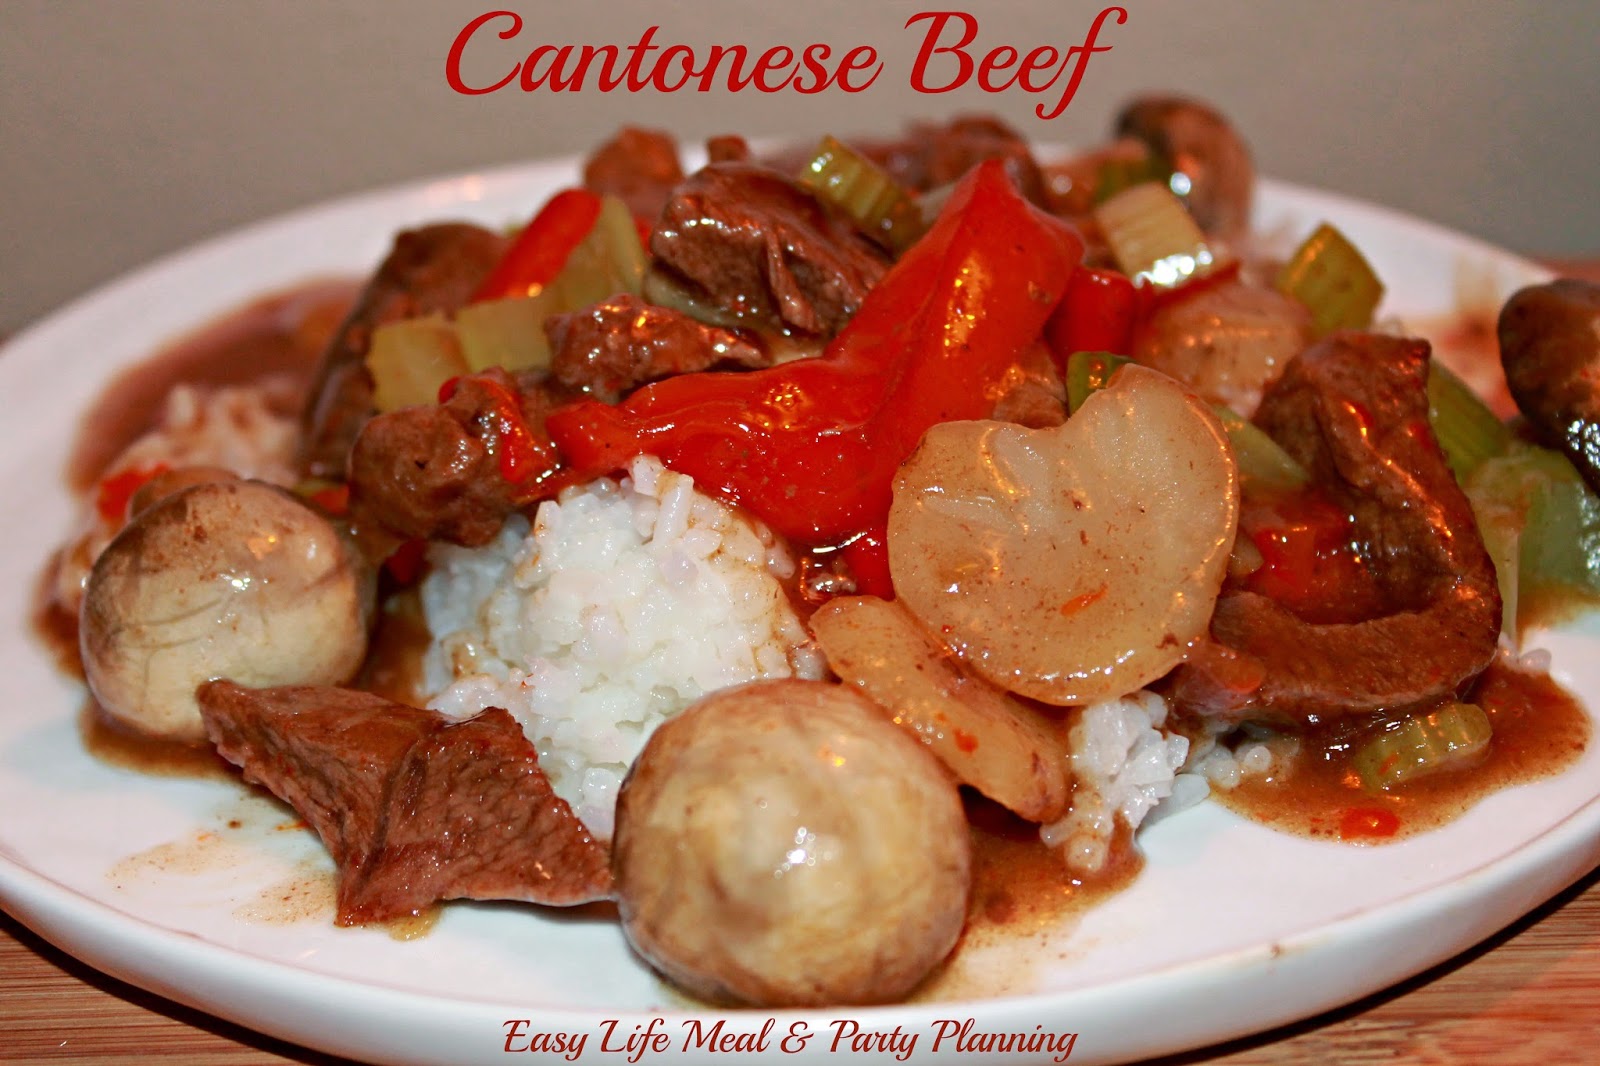 Cantonese Beef - Easy Life Meal & Party Planning - skillet meal simple to make containing spicy, sweet and sour flavors